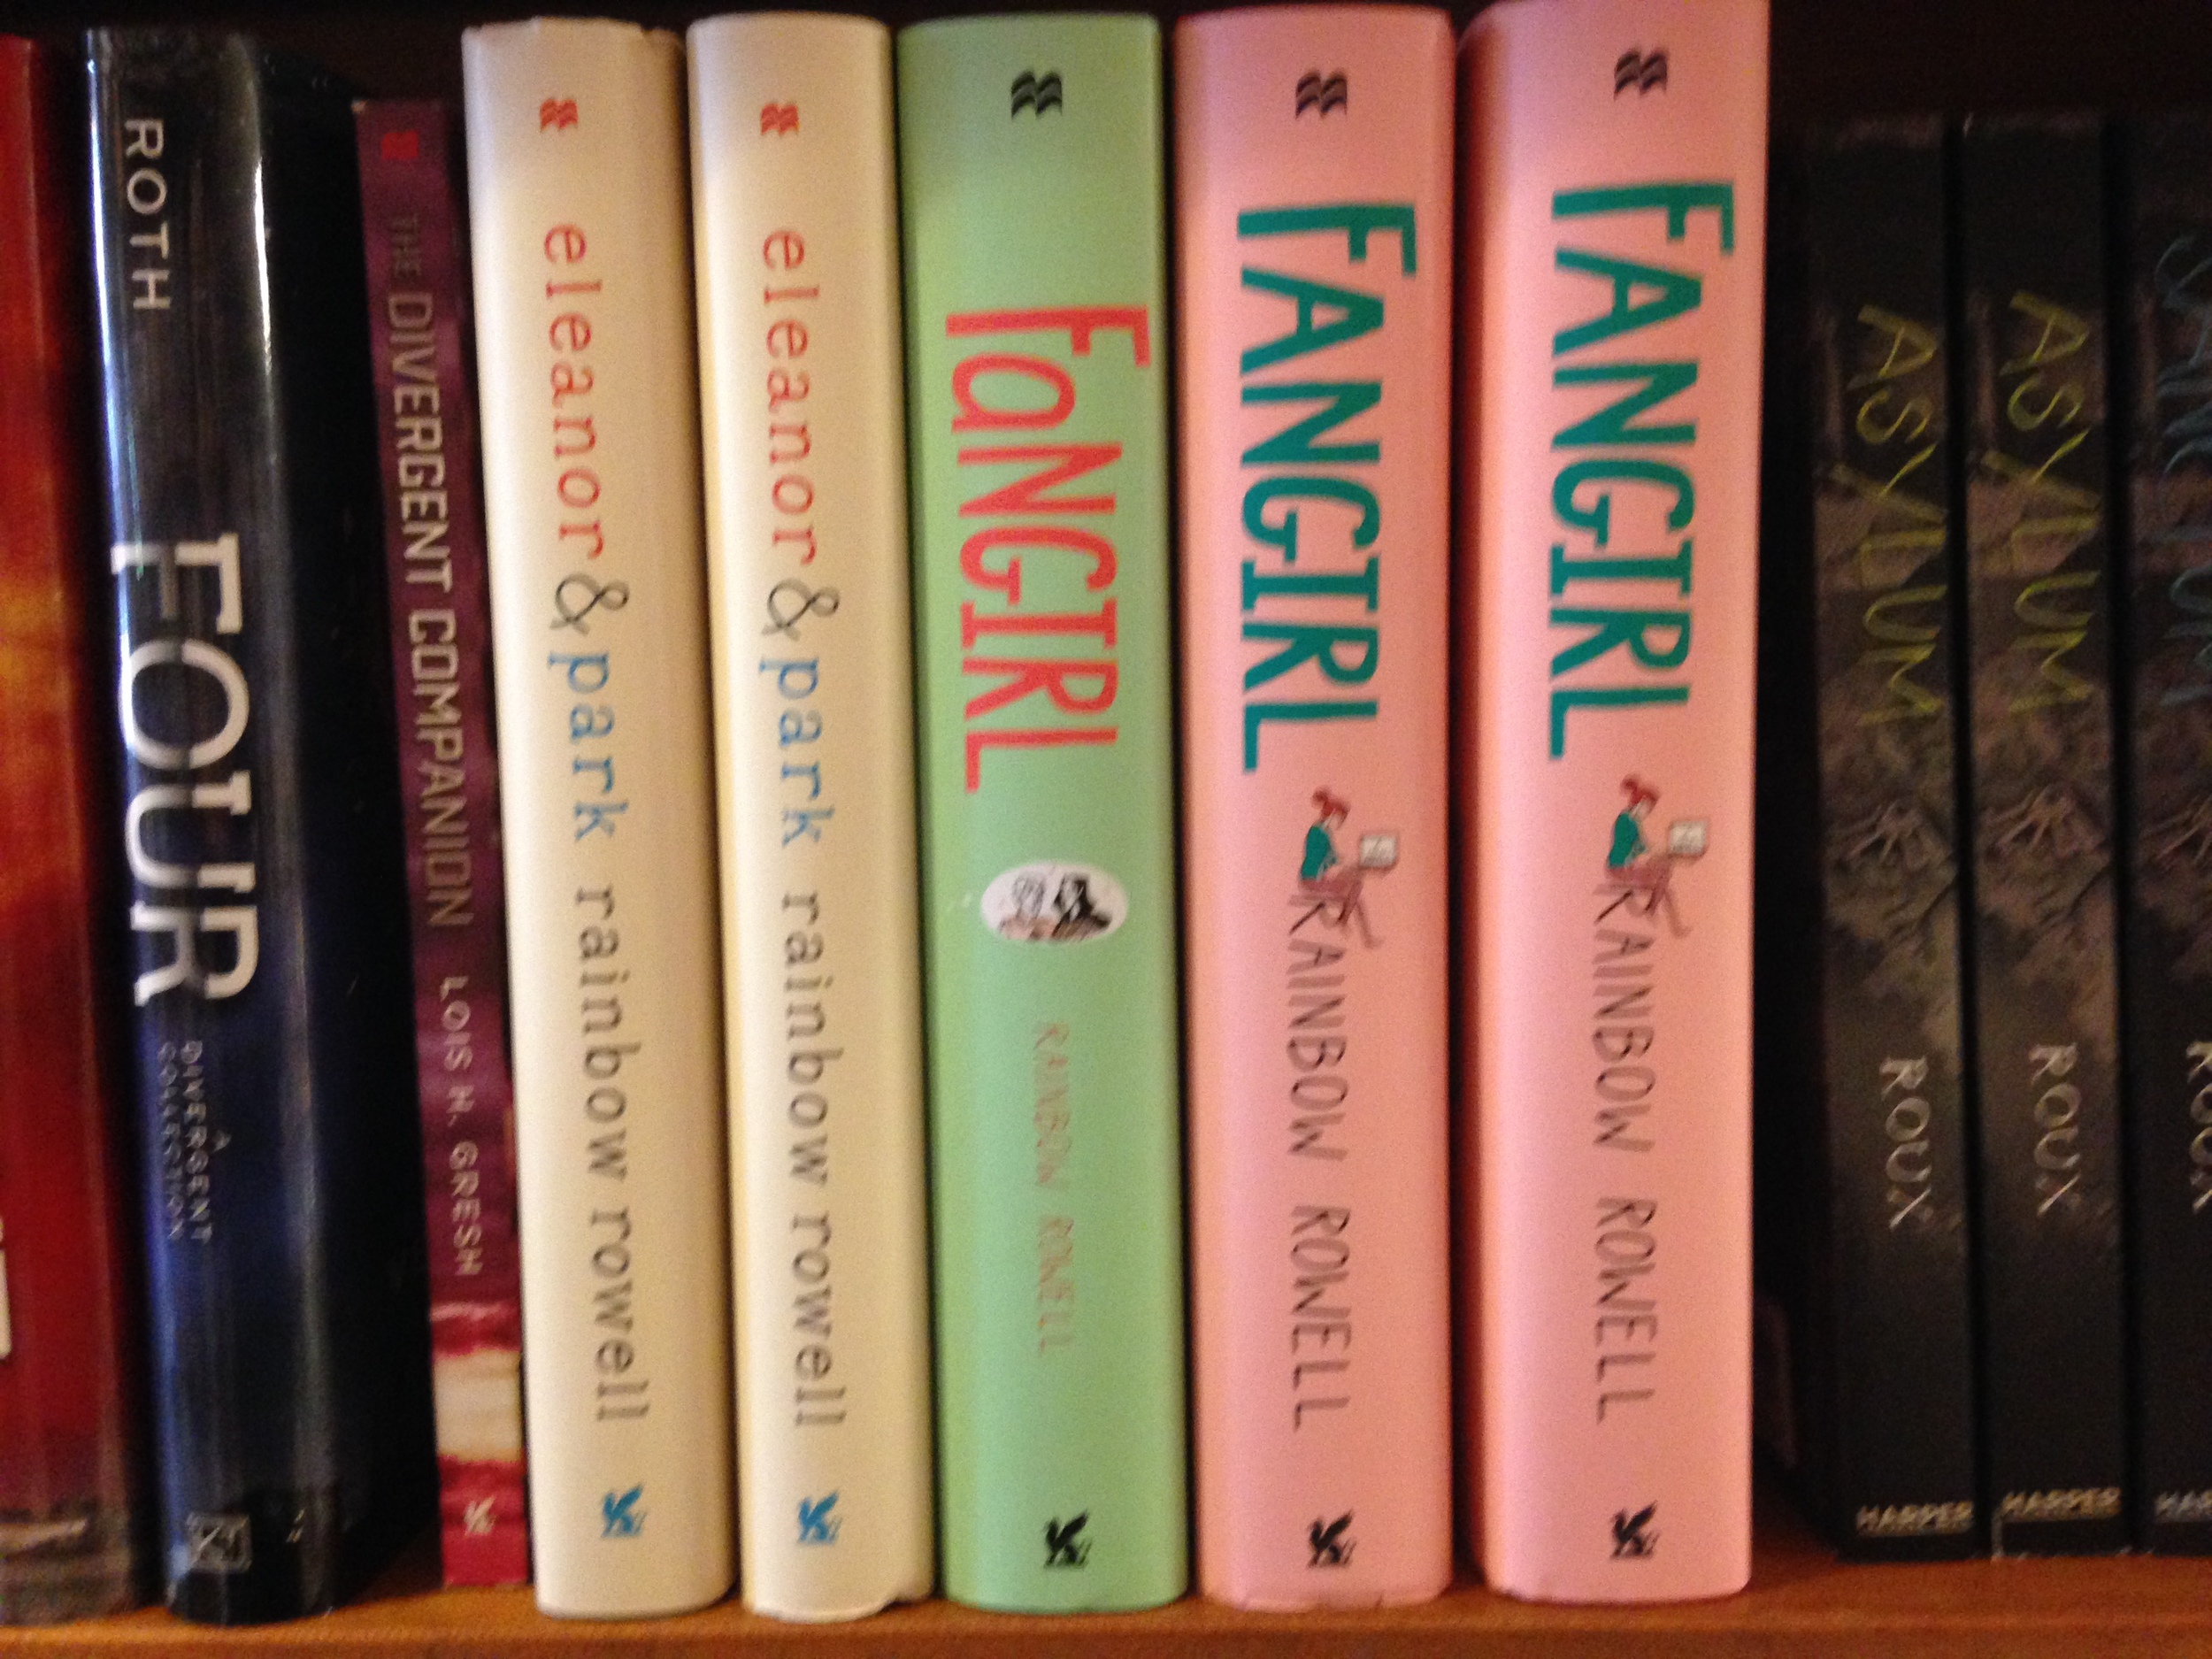 SO MUCH RAINBOW ROWELL IN HERE!